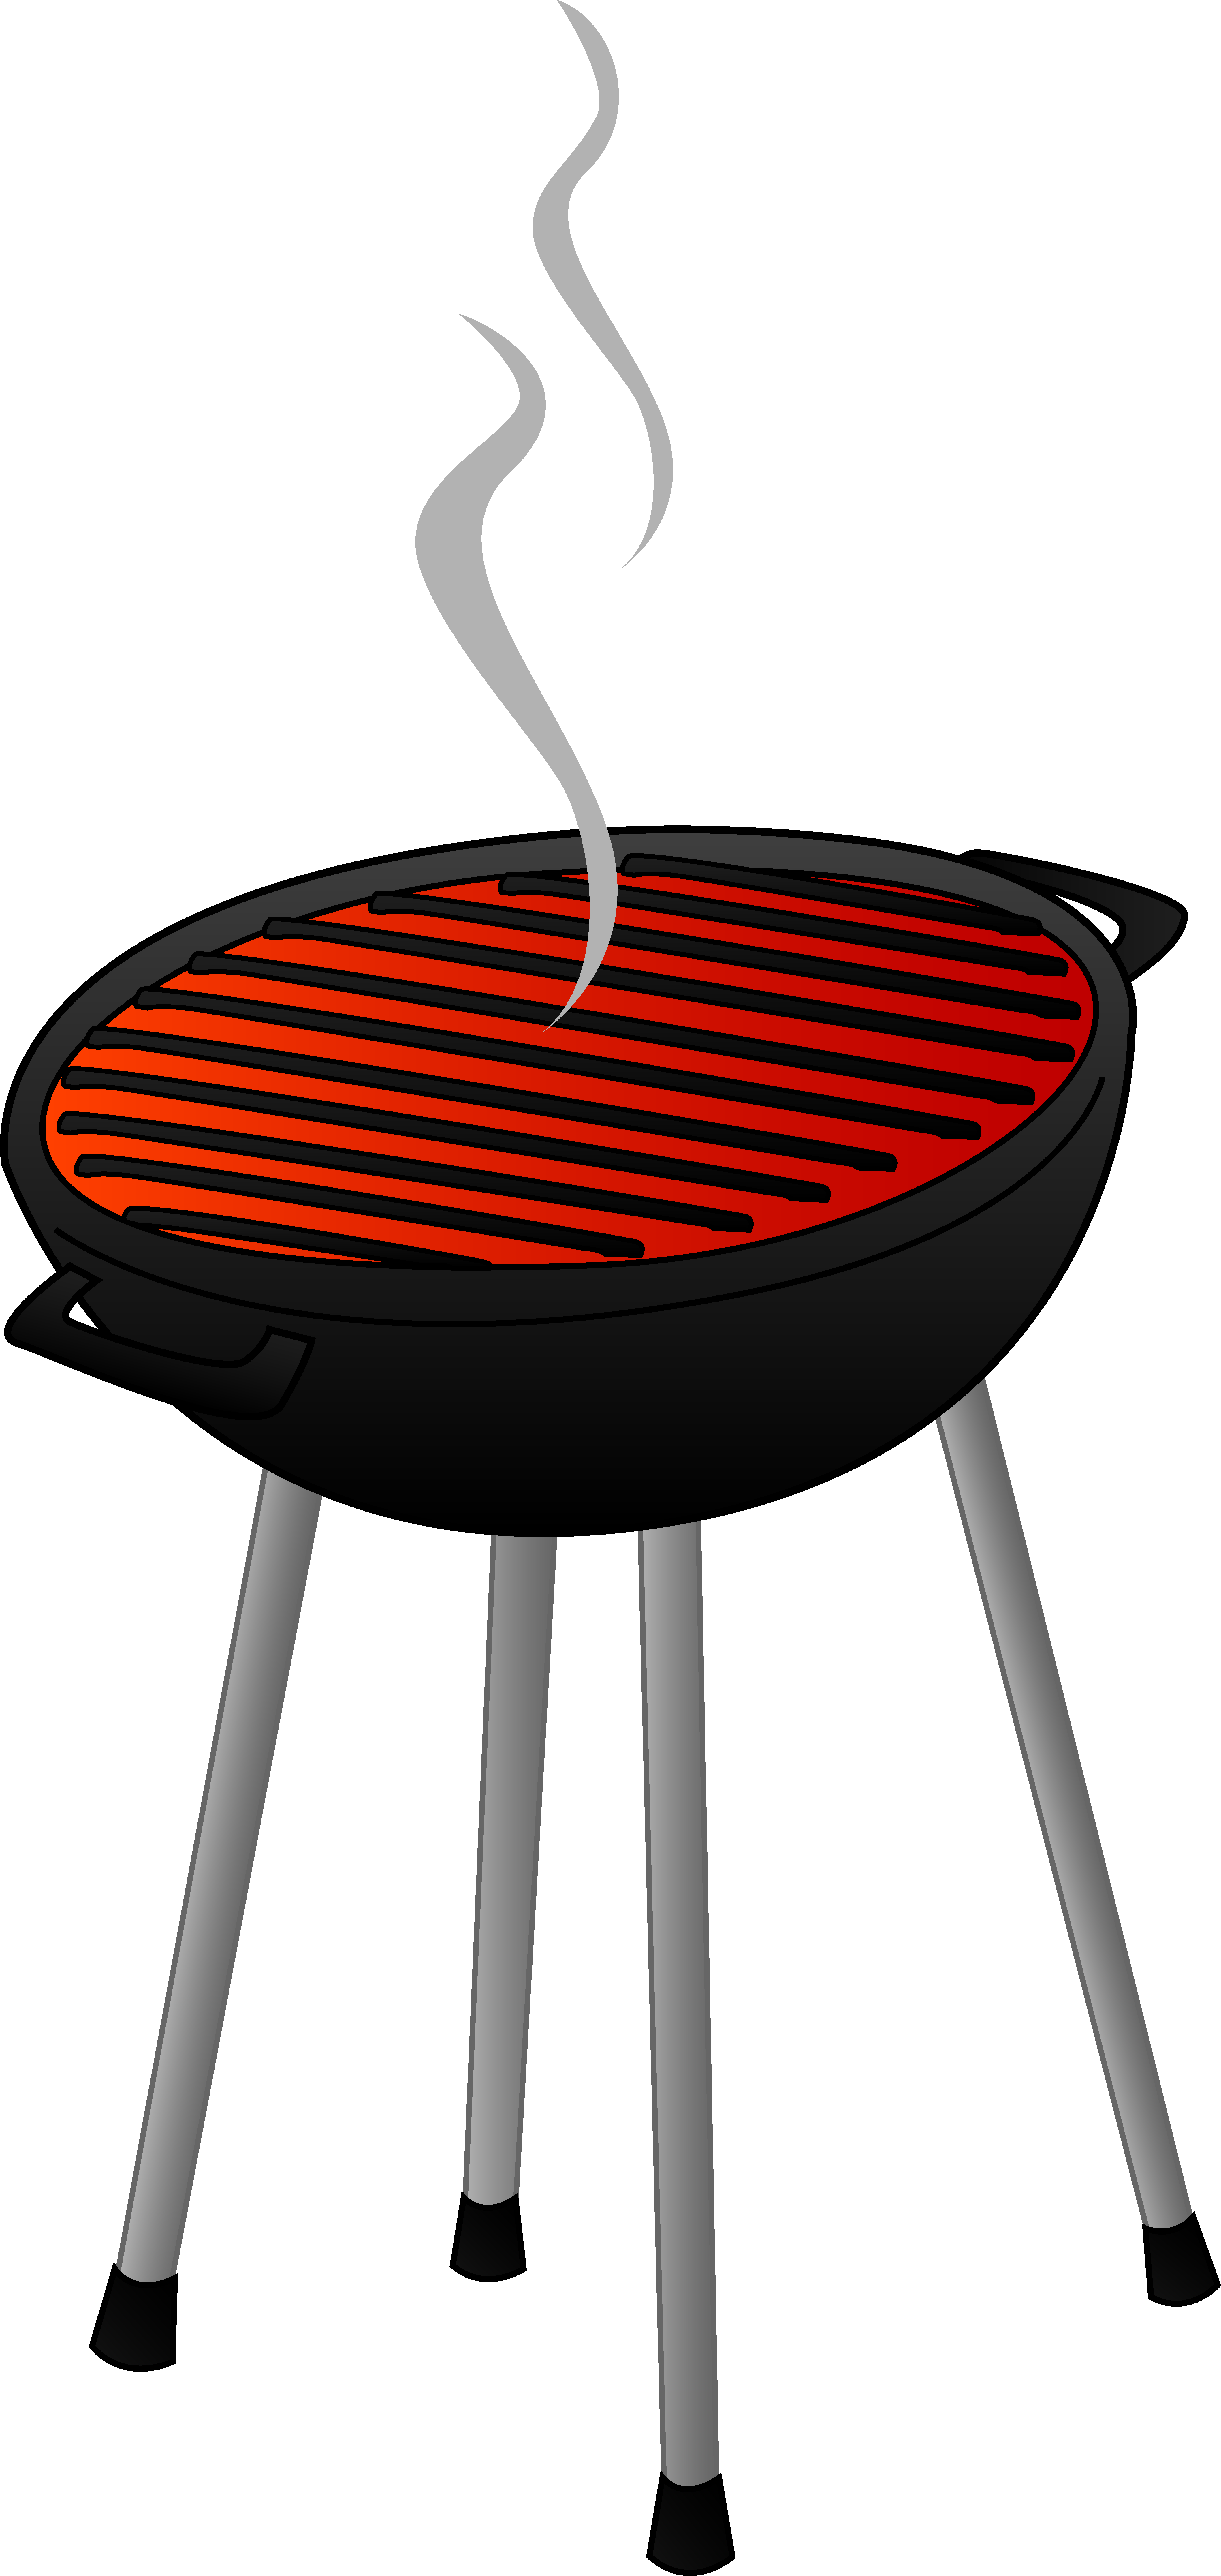 Barbecue clip art | Clipart library - Free Clipart Images